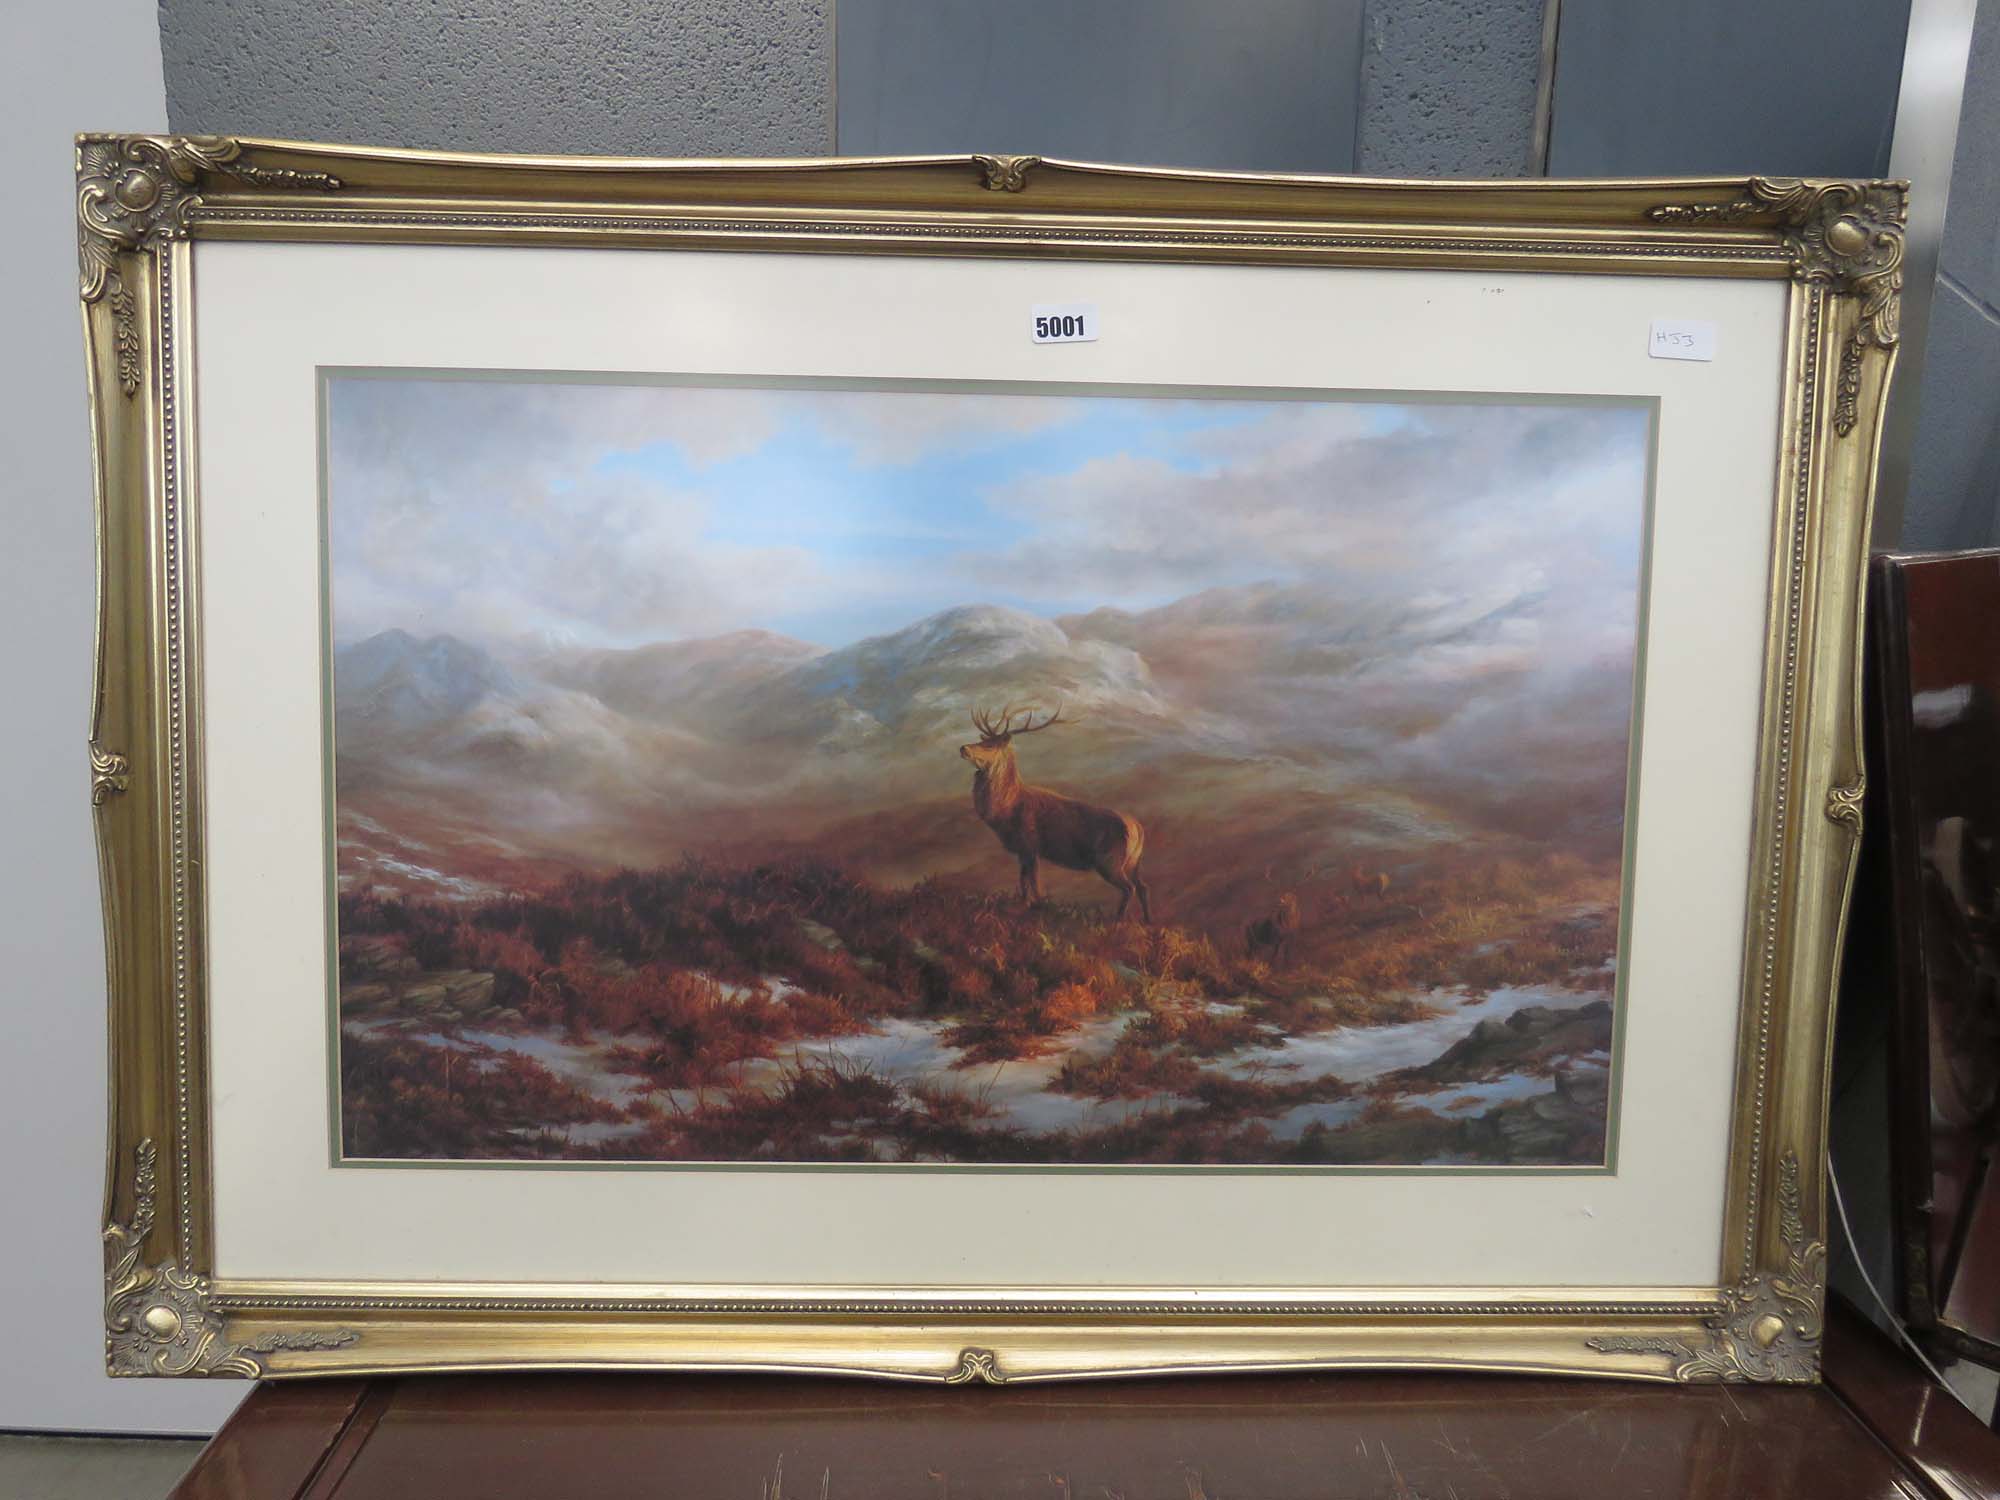 Framed and glazed print of a stag in highland setting